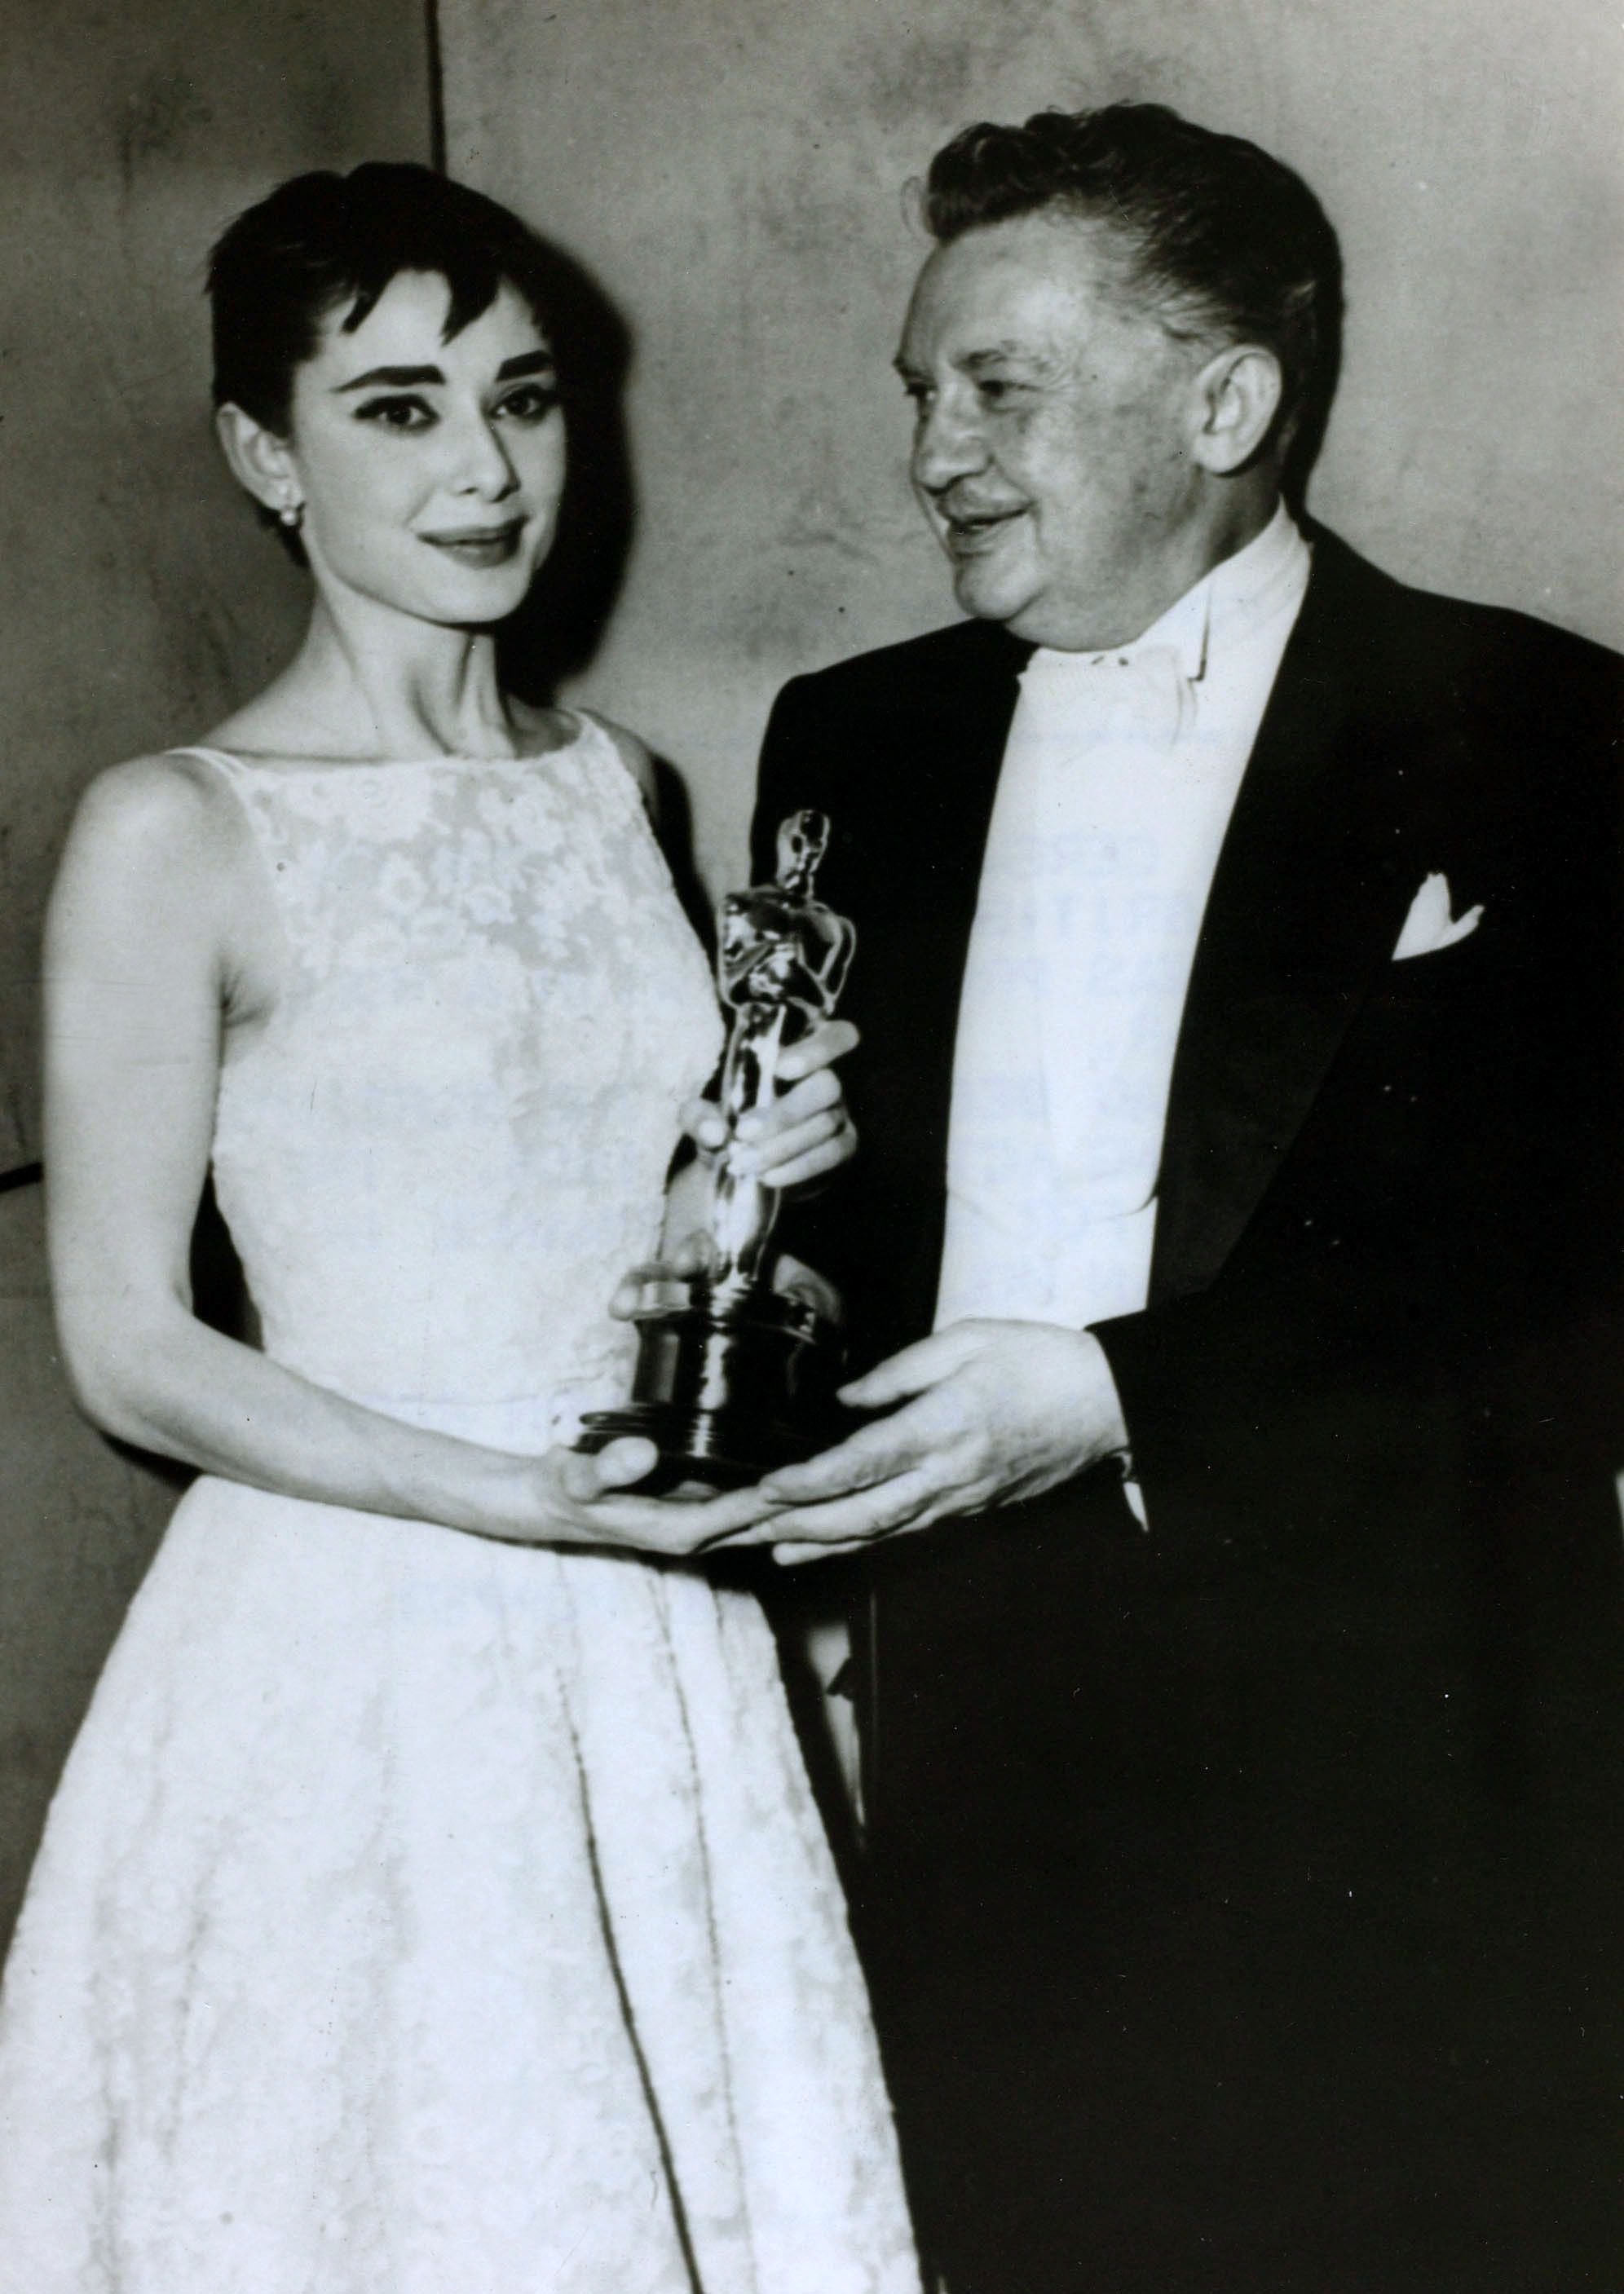  Audrey Hepburn receives her Oscar as Best Actress for her role in "Roman Holiday" | Source: Getty Images